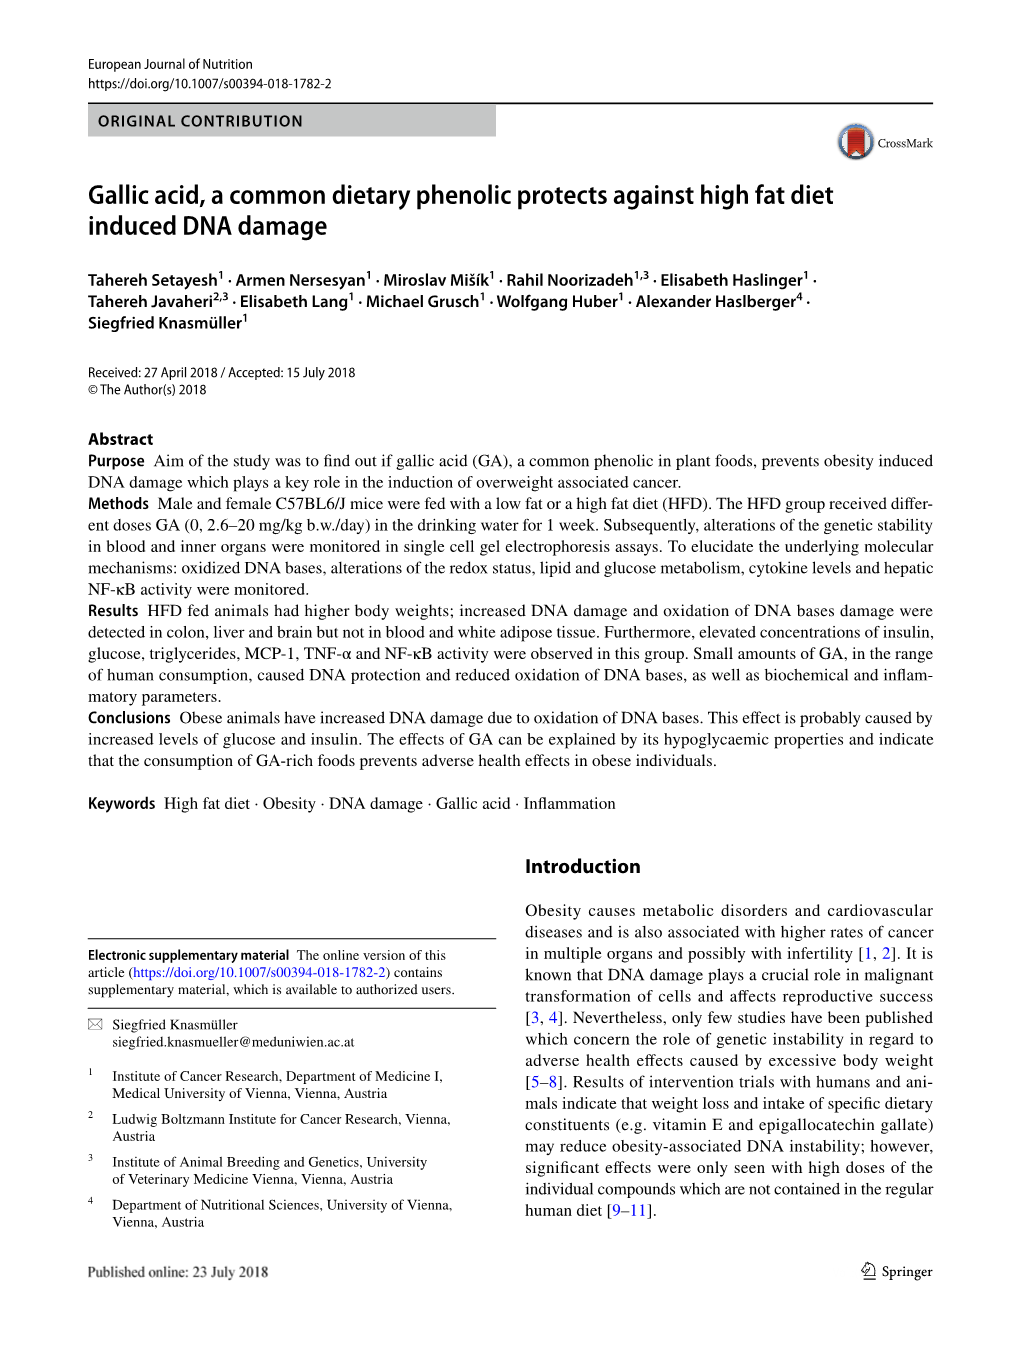 Gallic Acid, a Common Dietary Phenolic Protects Against High Fat Diet Induced DNA Damage